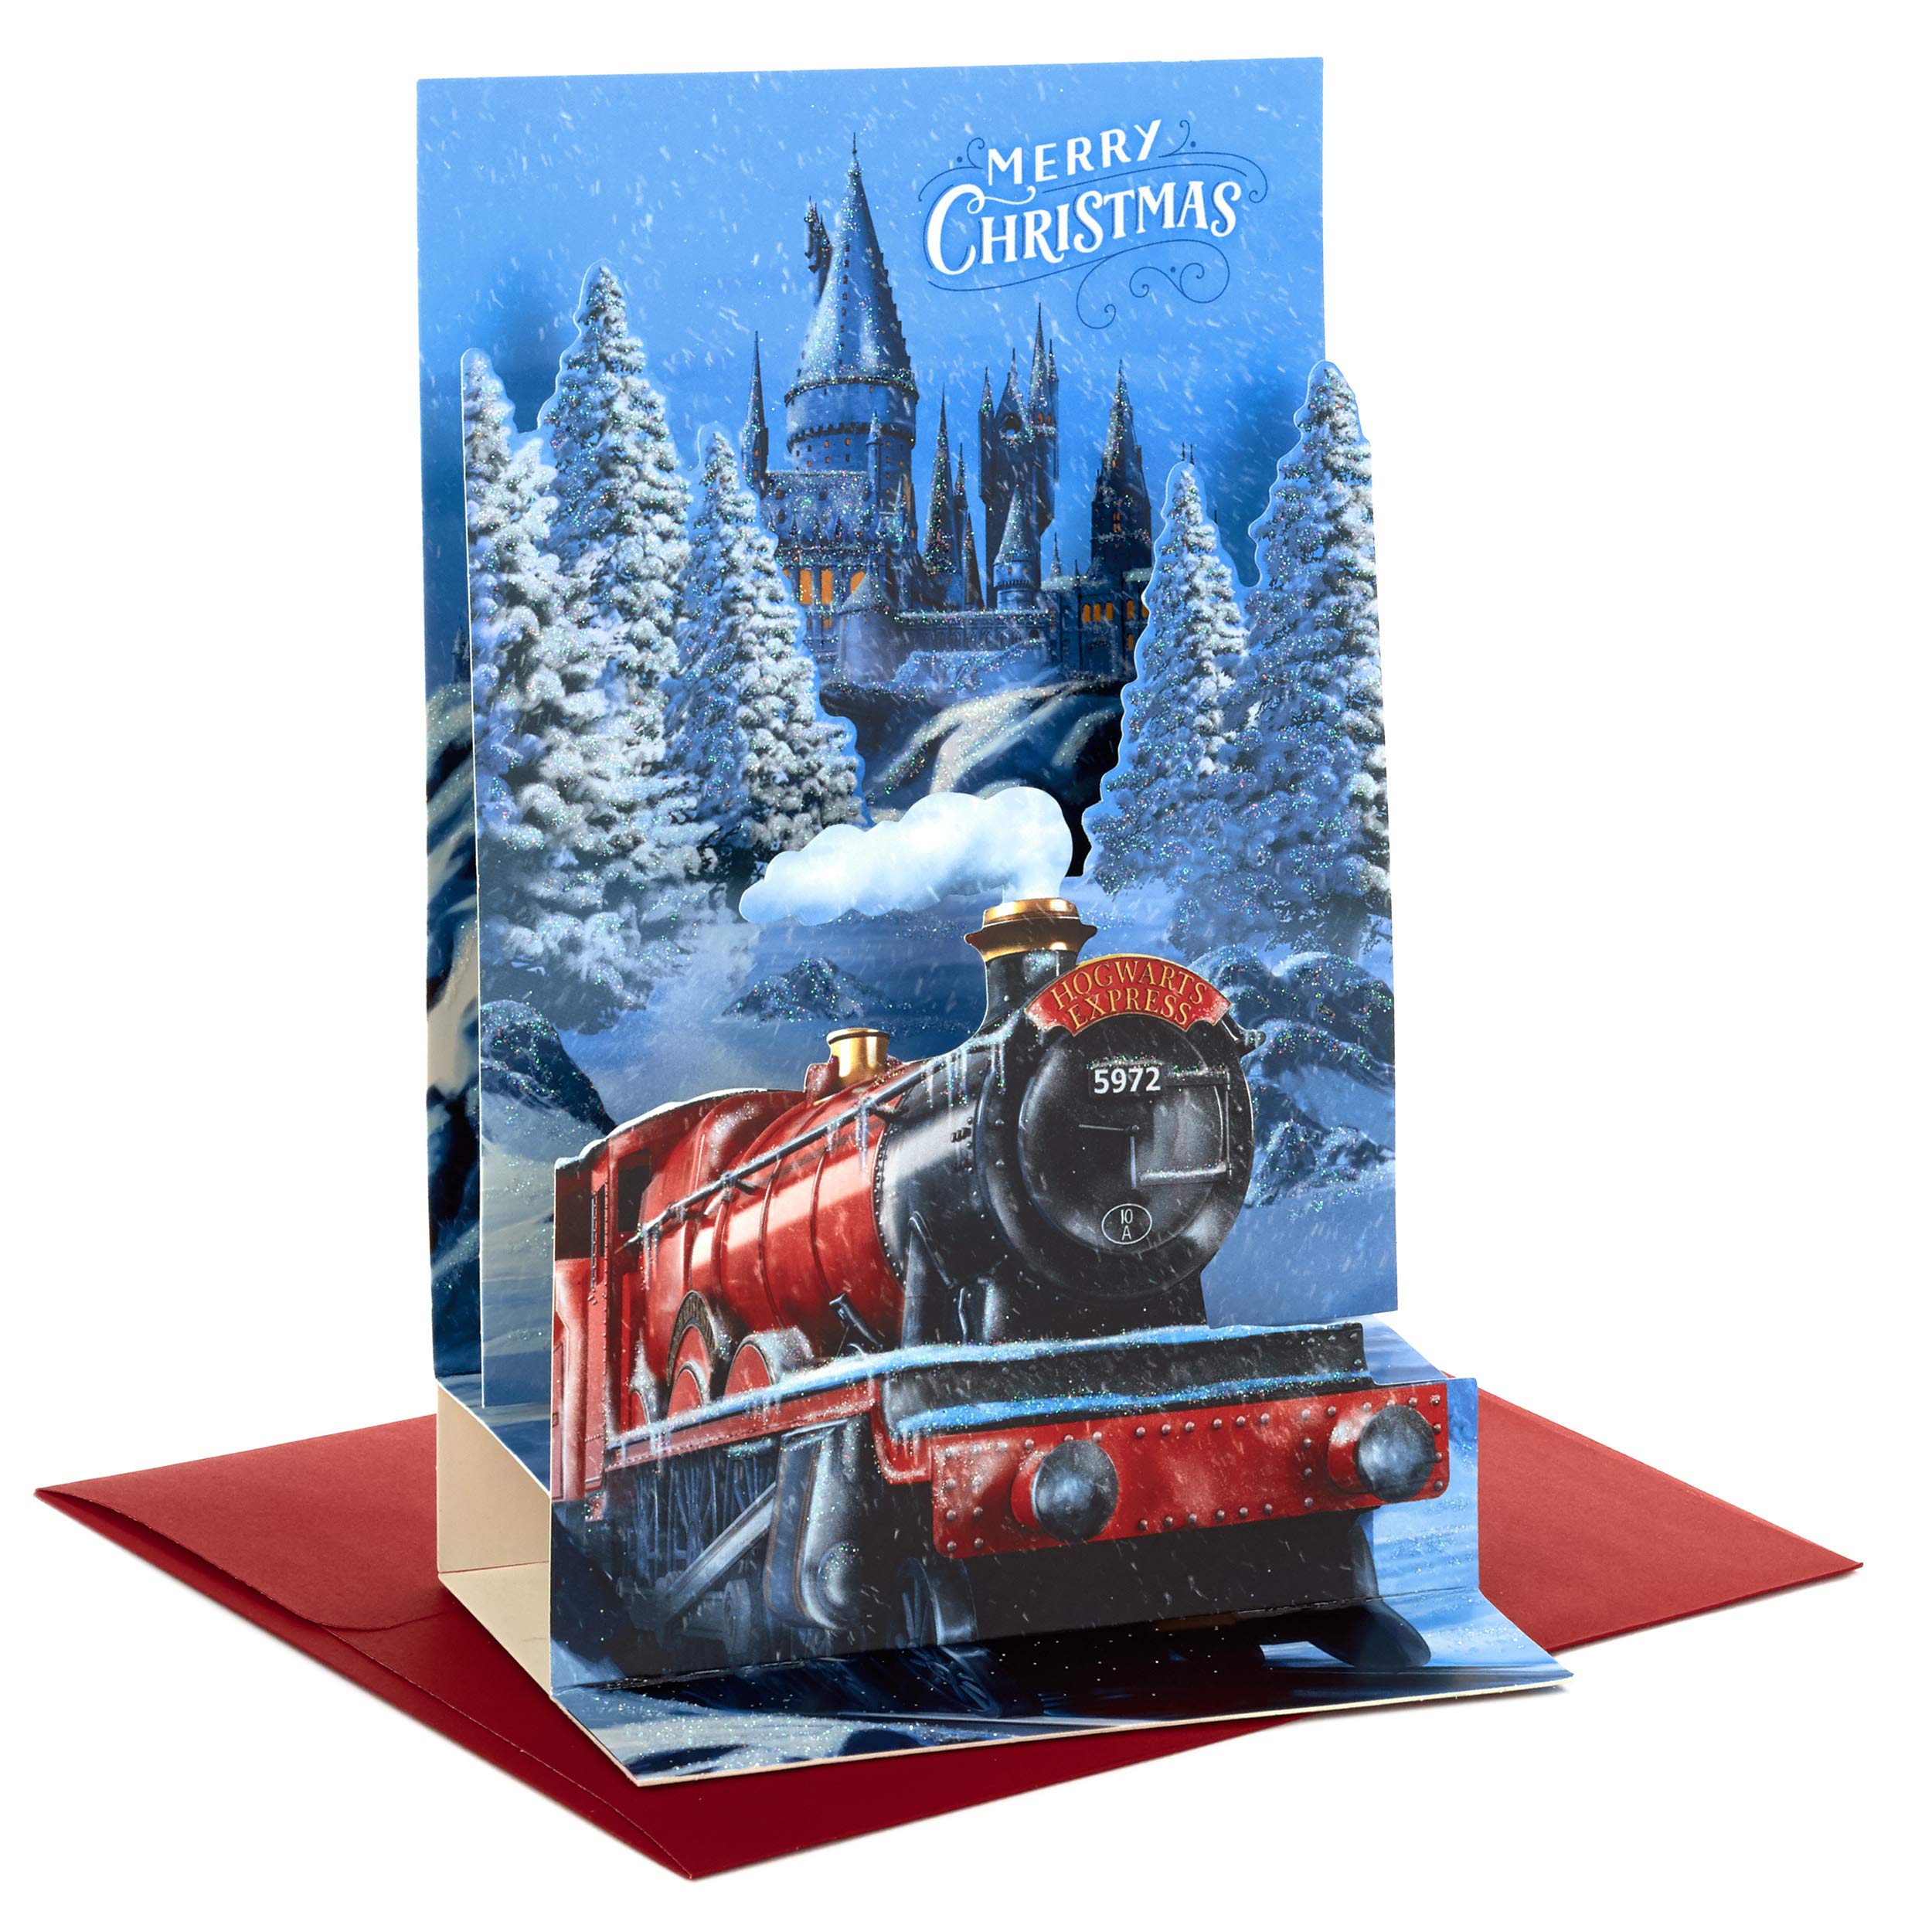 Hallmark Harry Potter Boxed Christmas Cards, Hogwarts Express Paper Craft (8 Displayable Pop Up Cards and Envelopes) - $3.47 at Amazon